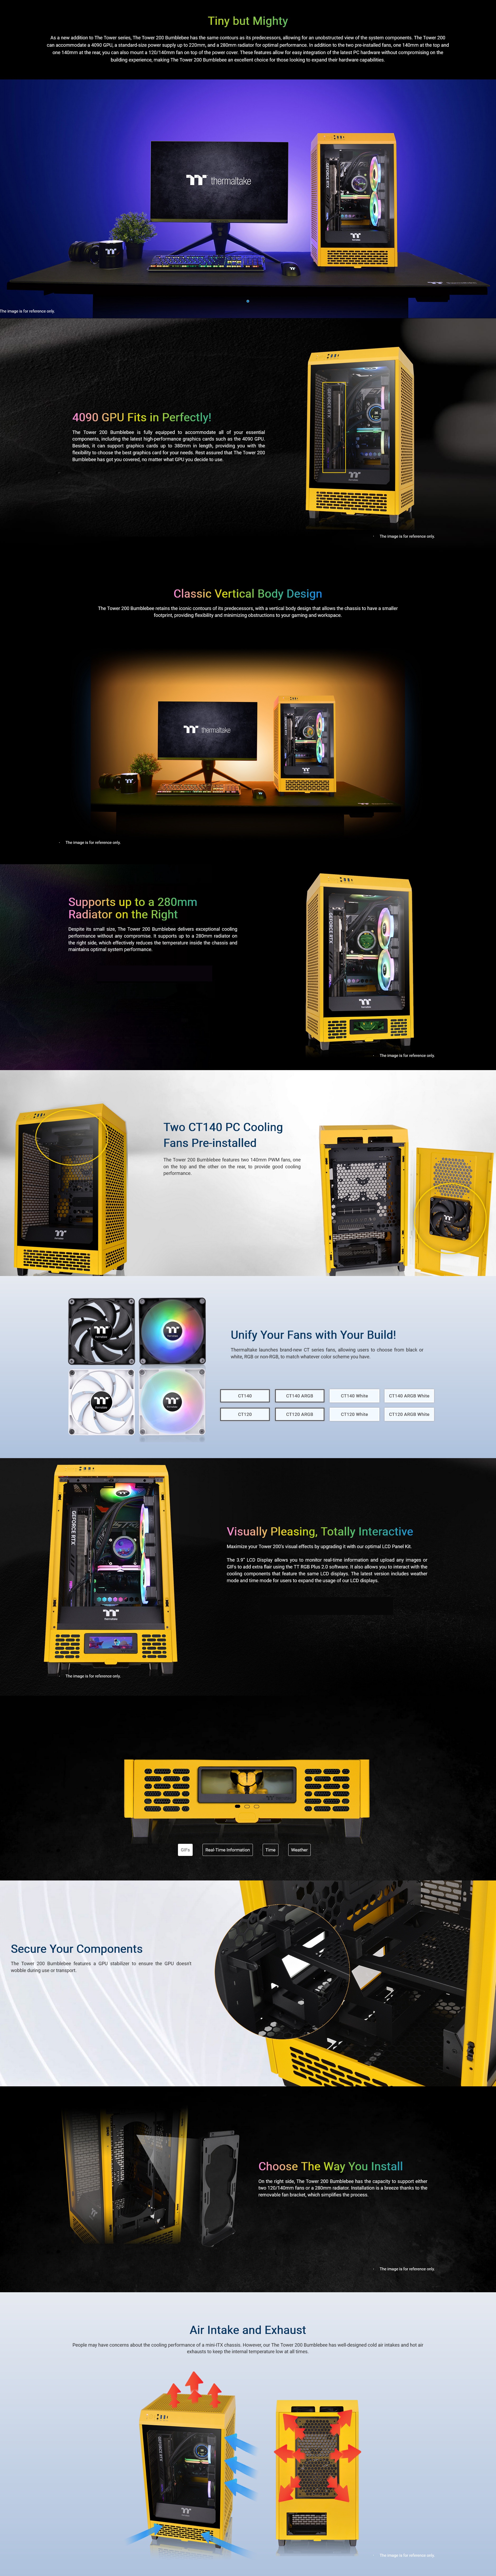 A large marketing image providing additional information about the product Thermaltake The Tower 200 - Mini Tower Case (Bumblebee) - Additional alt info not provided